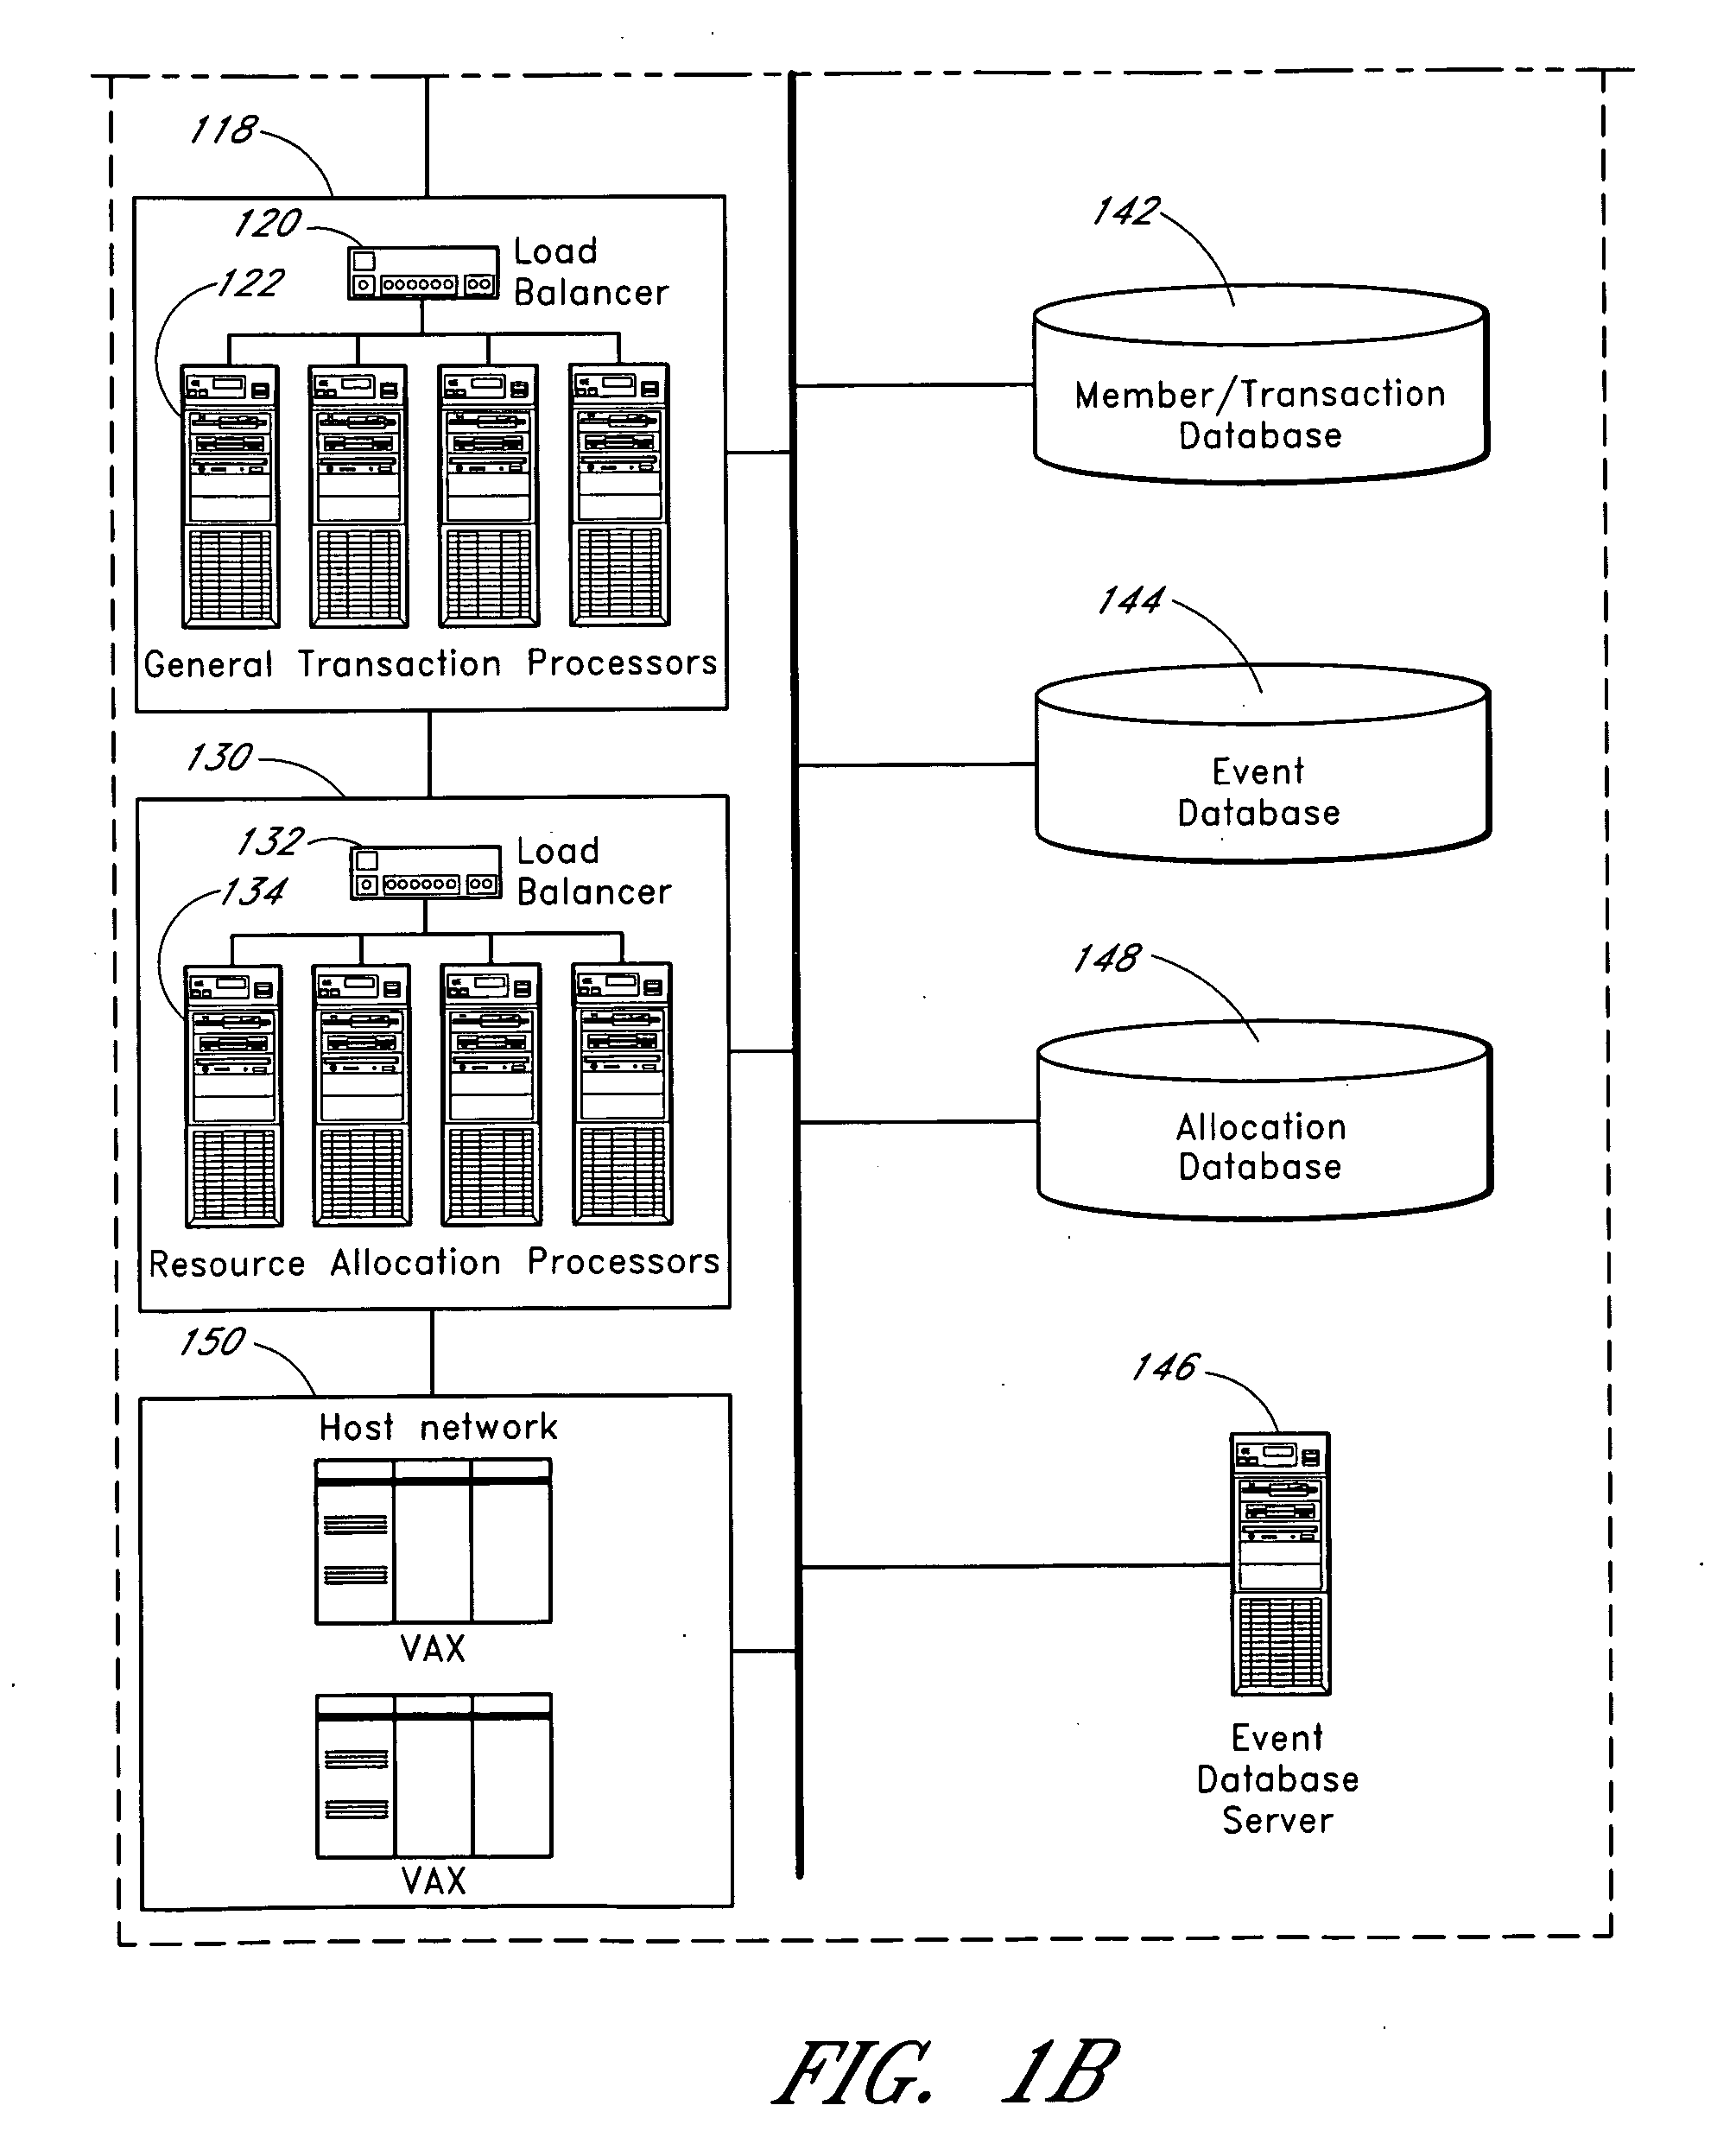 Real time data distribution system